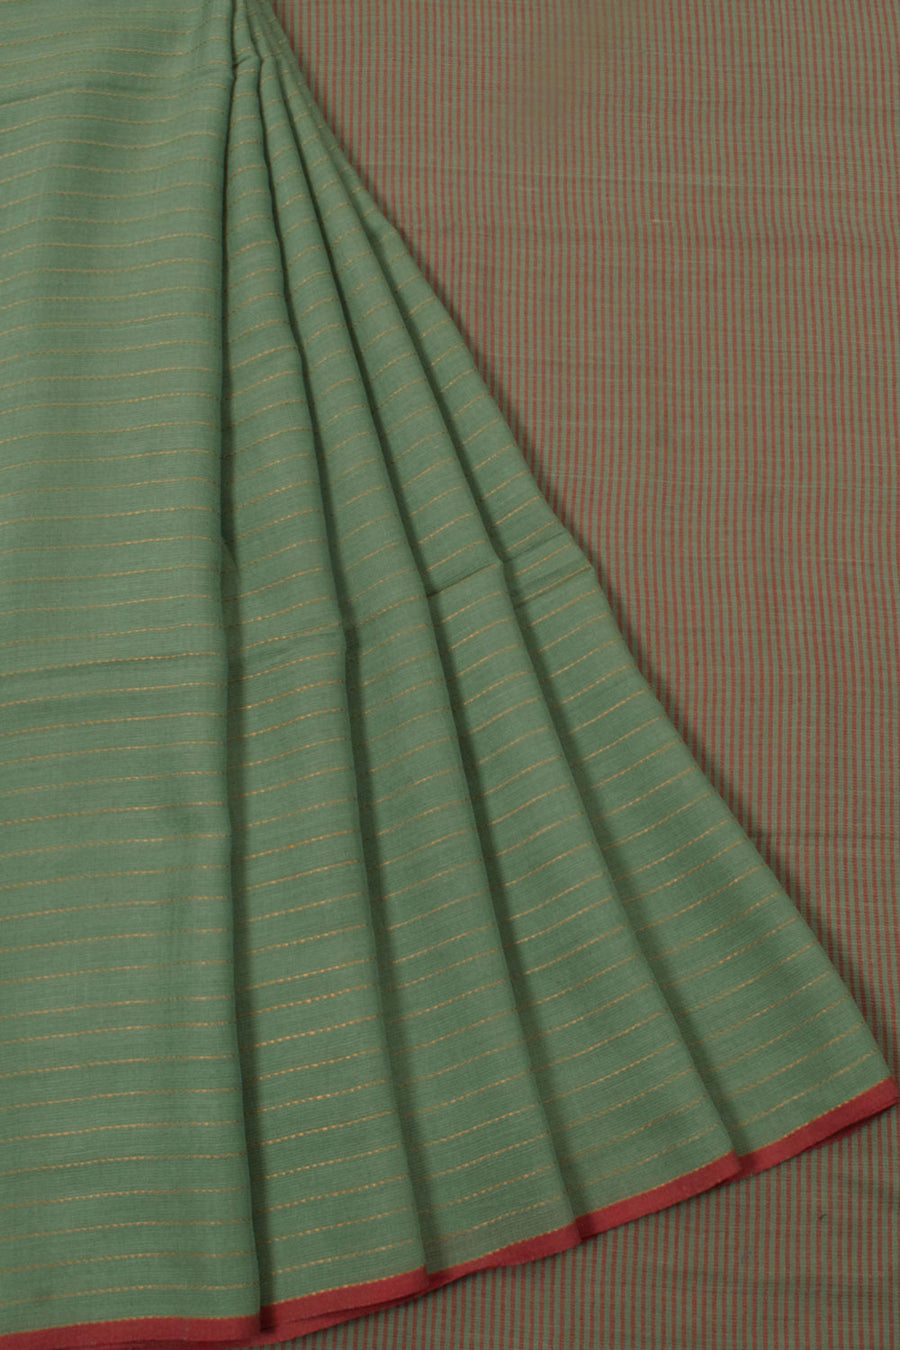 Handloom Silk Cotton Saree with Stripes Design and Red Selvedge 